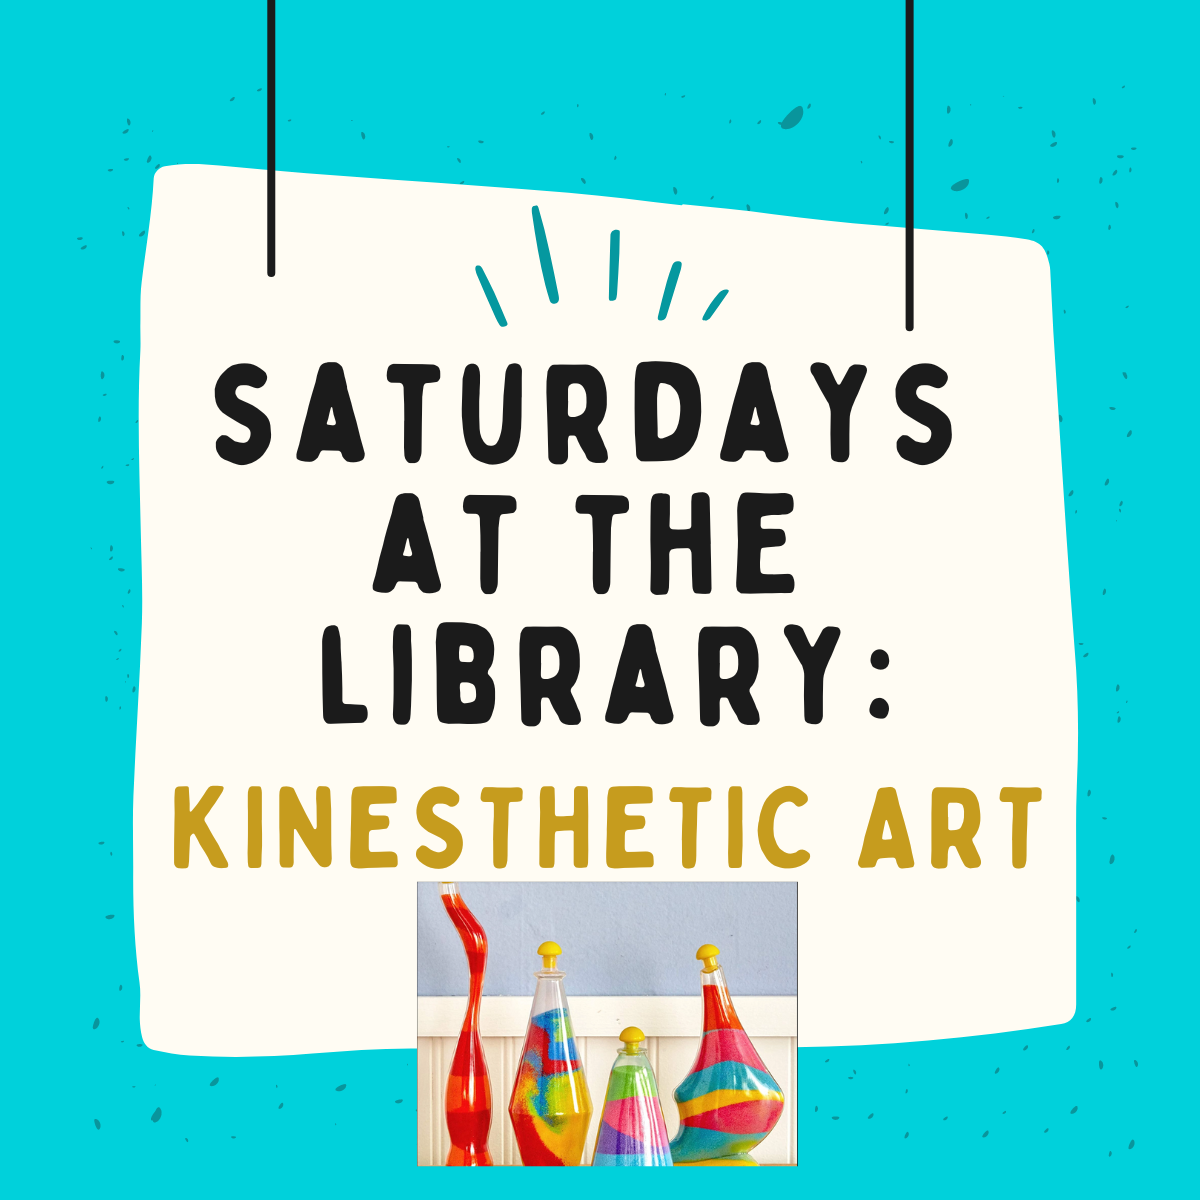 Text reading "Saturdays at the Library: Kinesthetic Art" with an image of colored sand in plastic display vases below it.